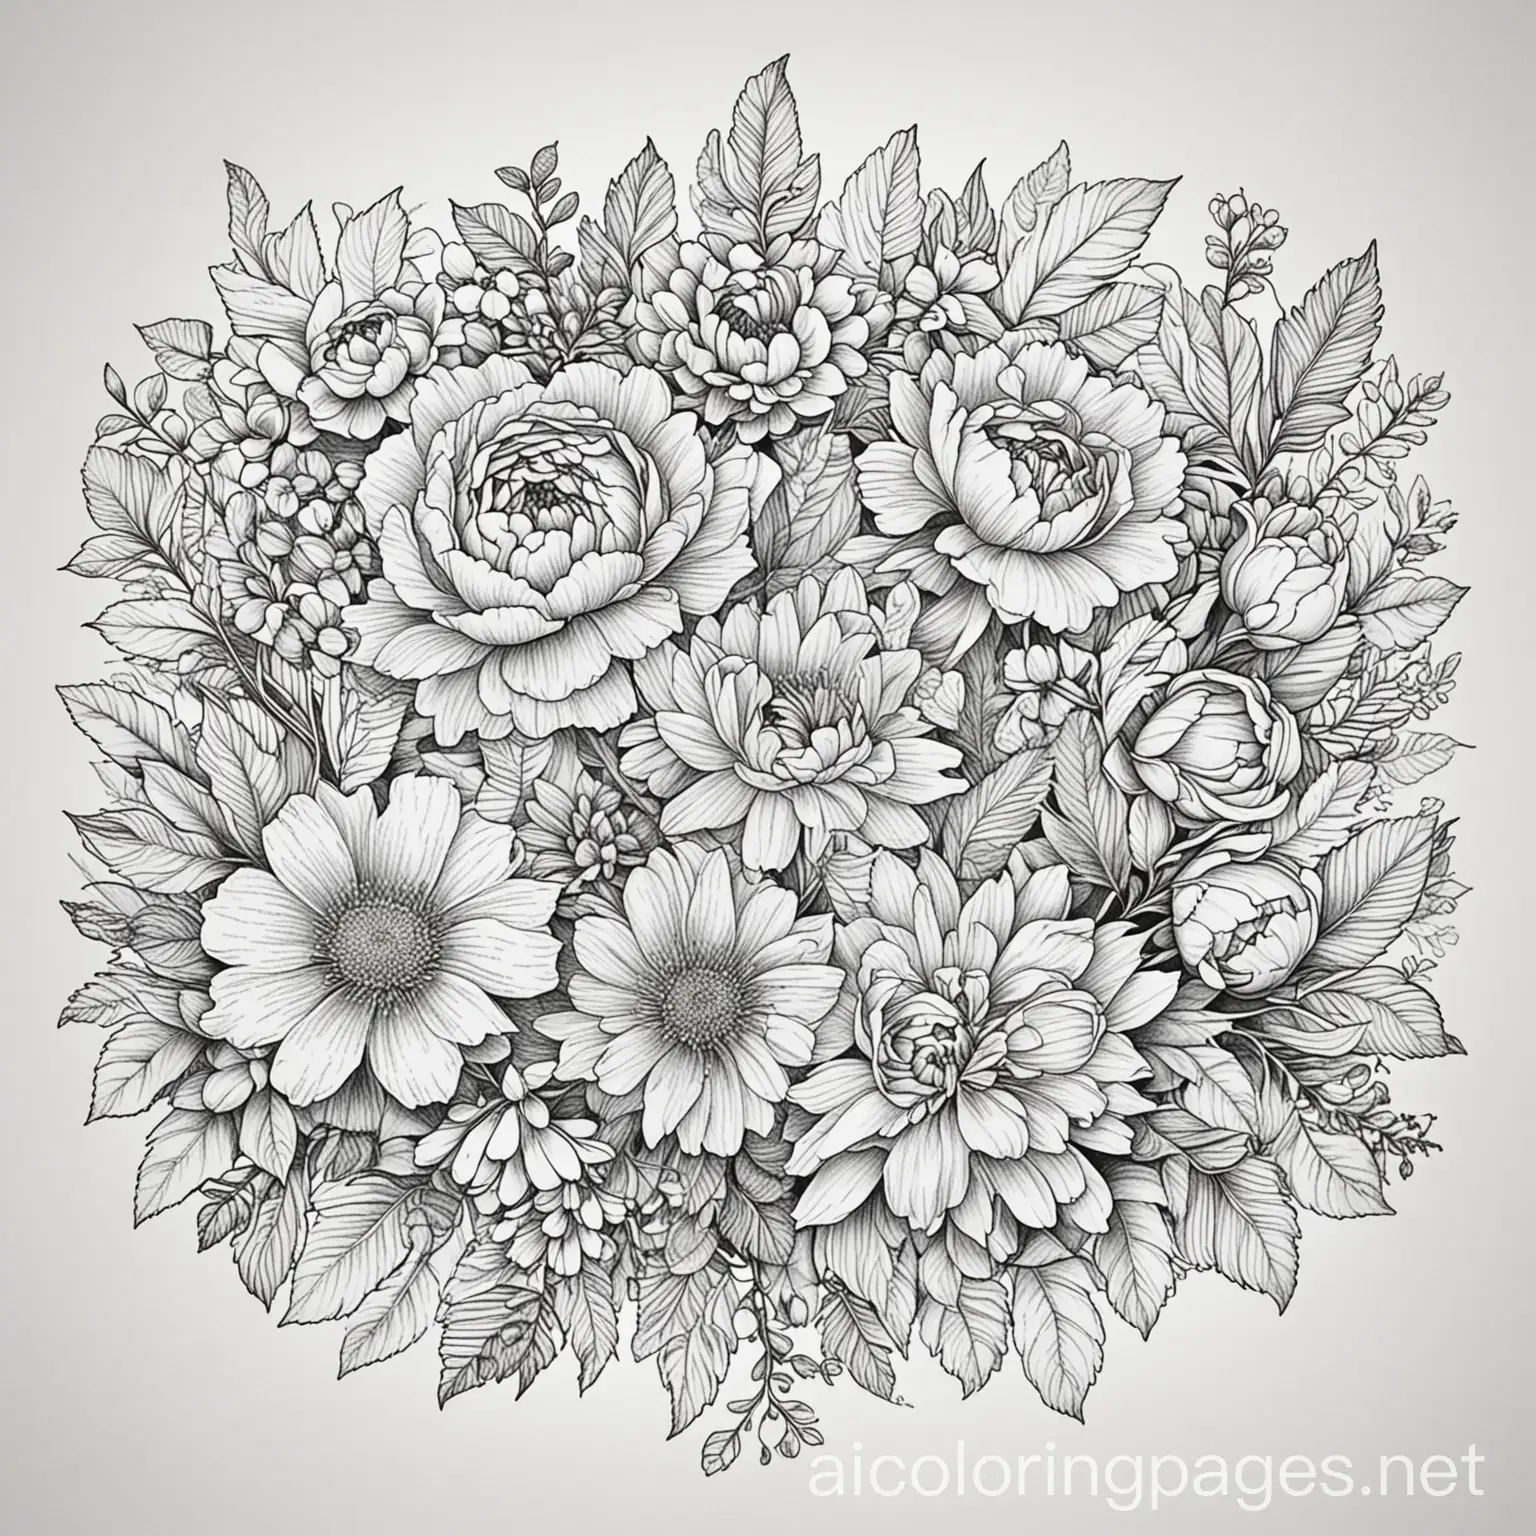 A beautifully detailed floral arrangement with various flowers like roses, daisies, and peonies, intricately drawn with swirling vines and leaves. The flowers are in full bloom, with a soft, elegant feel., Coloring Page, black and white, line art, white background, Simplicity, Ample White Space. The background of the coloring page is plain white to make it easy for young children to color within the lines. The outlines of all the subjects are easy to distinguish, making it simple for kids to color without too much difficulty